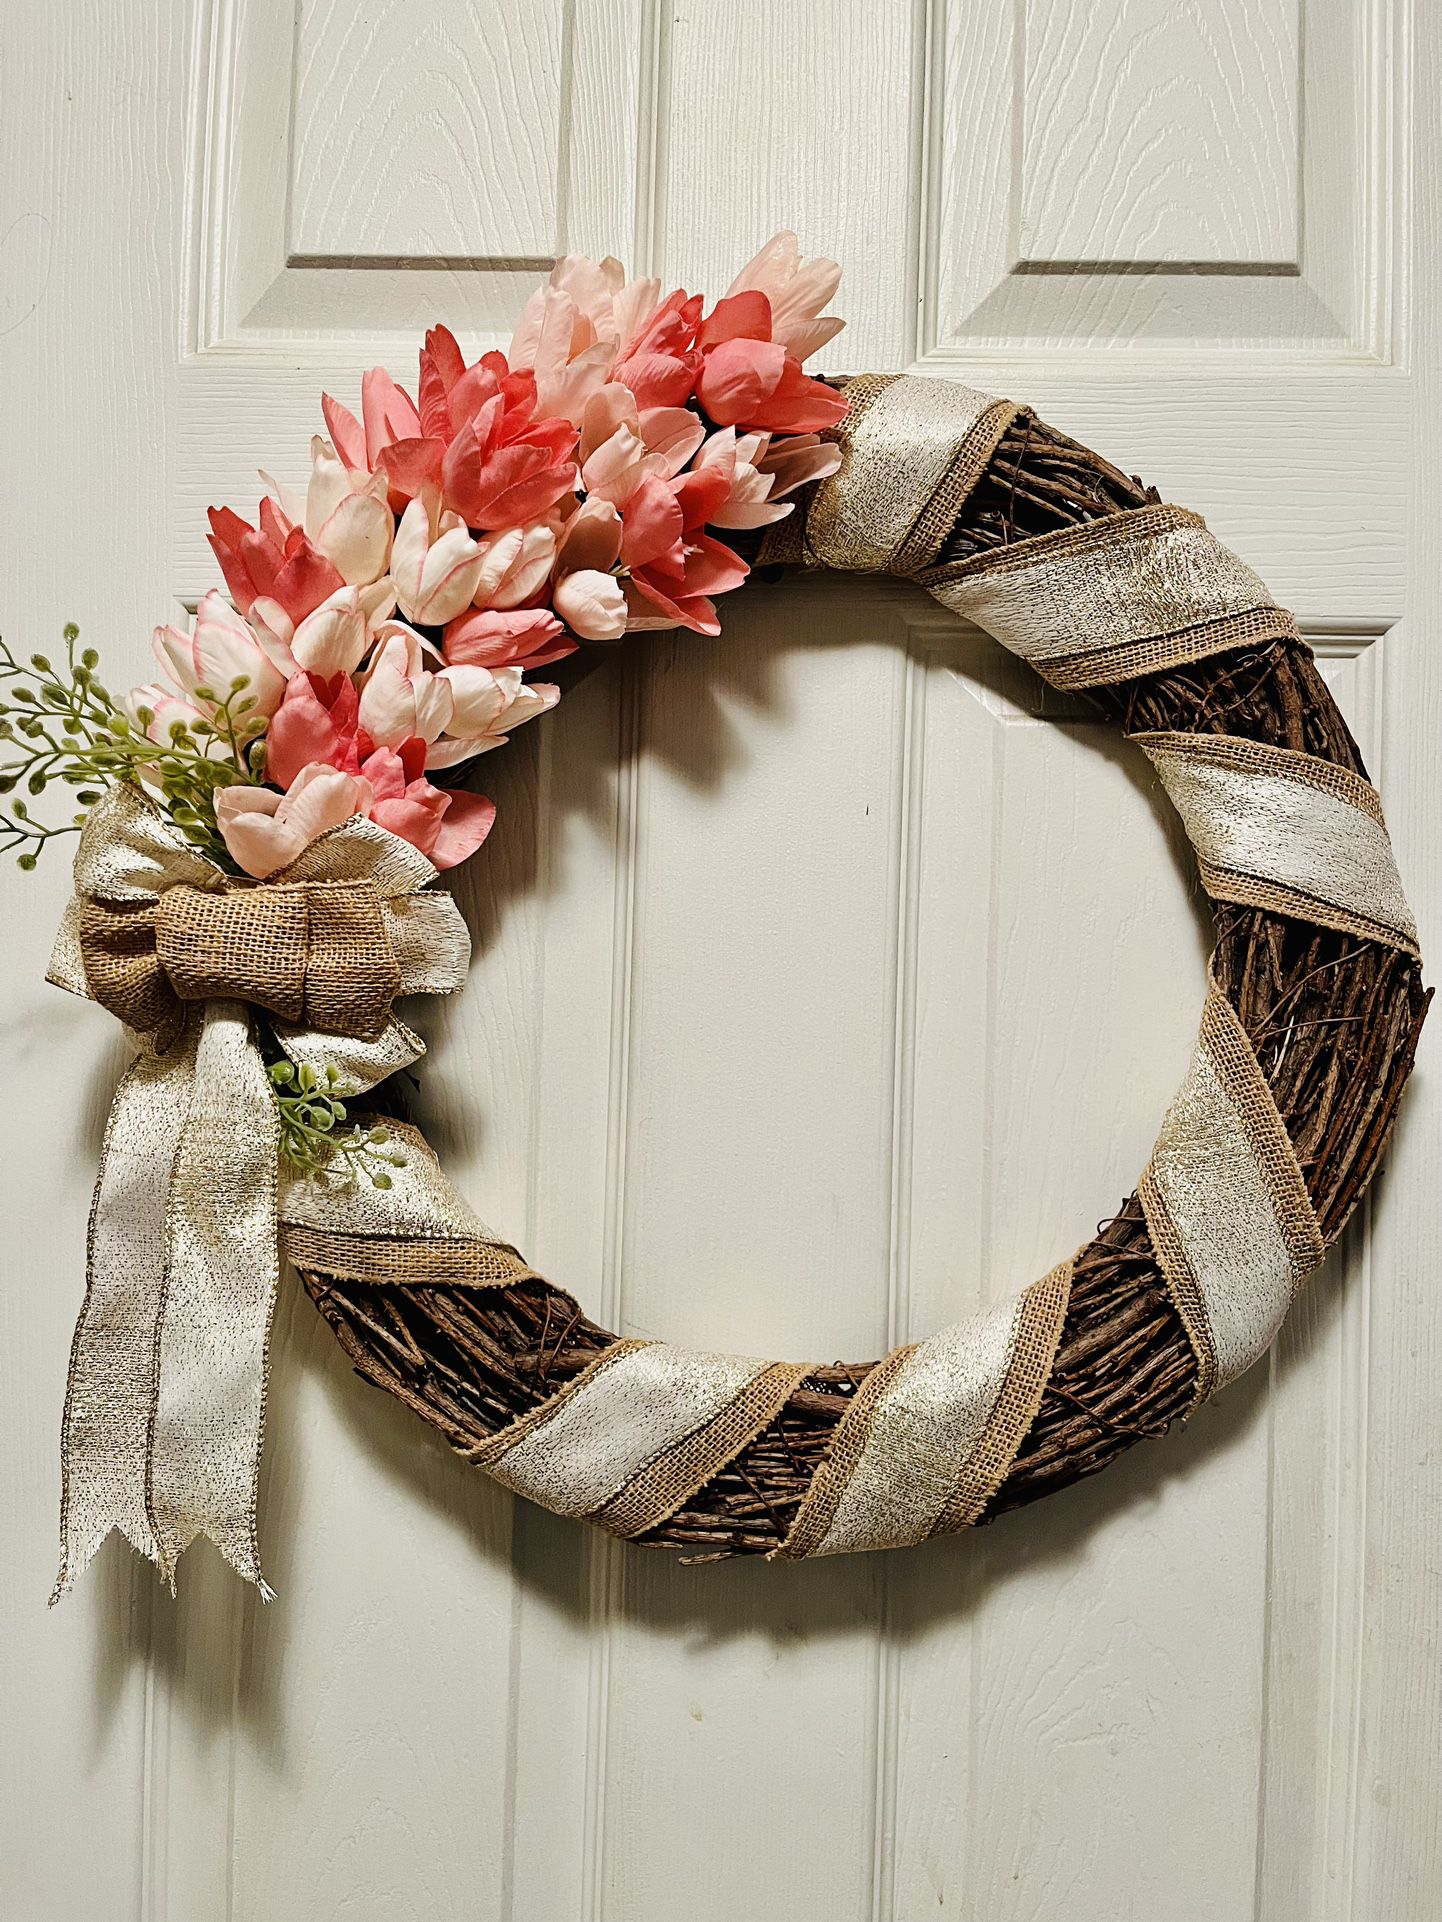 Spring elegant wreath. New. 18”from left to right. Comes in its own box. (Brown) ships from a smoke free environment.  